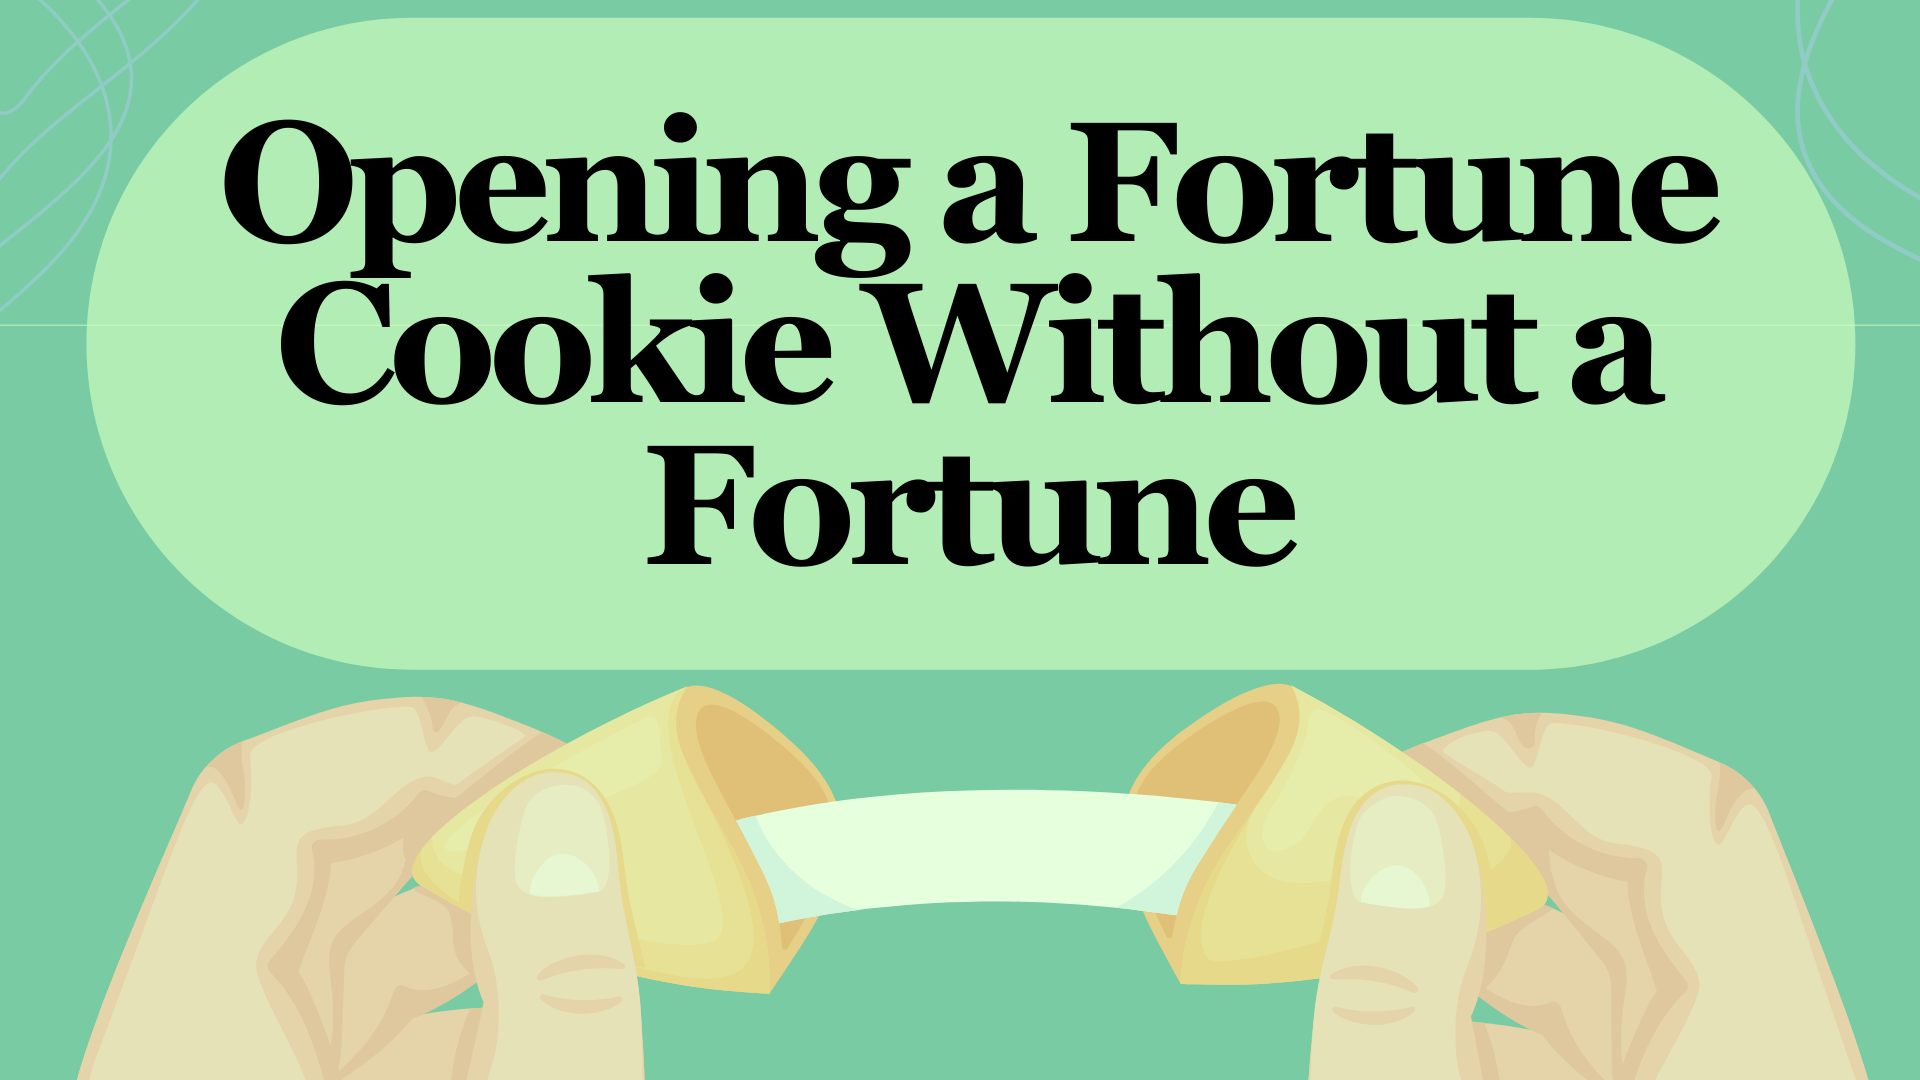 Opening a Fortune Cookie Without a Fortune